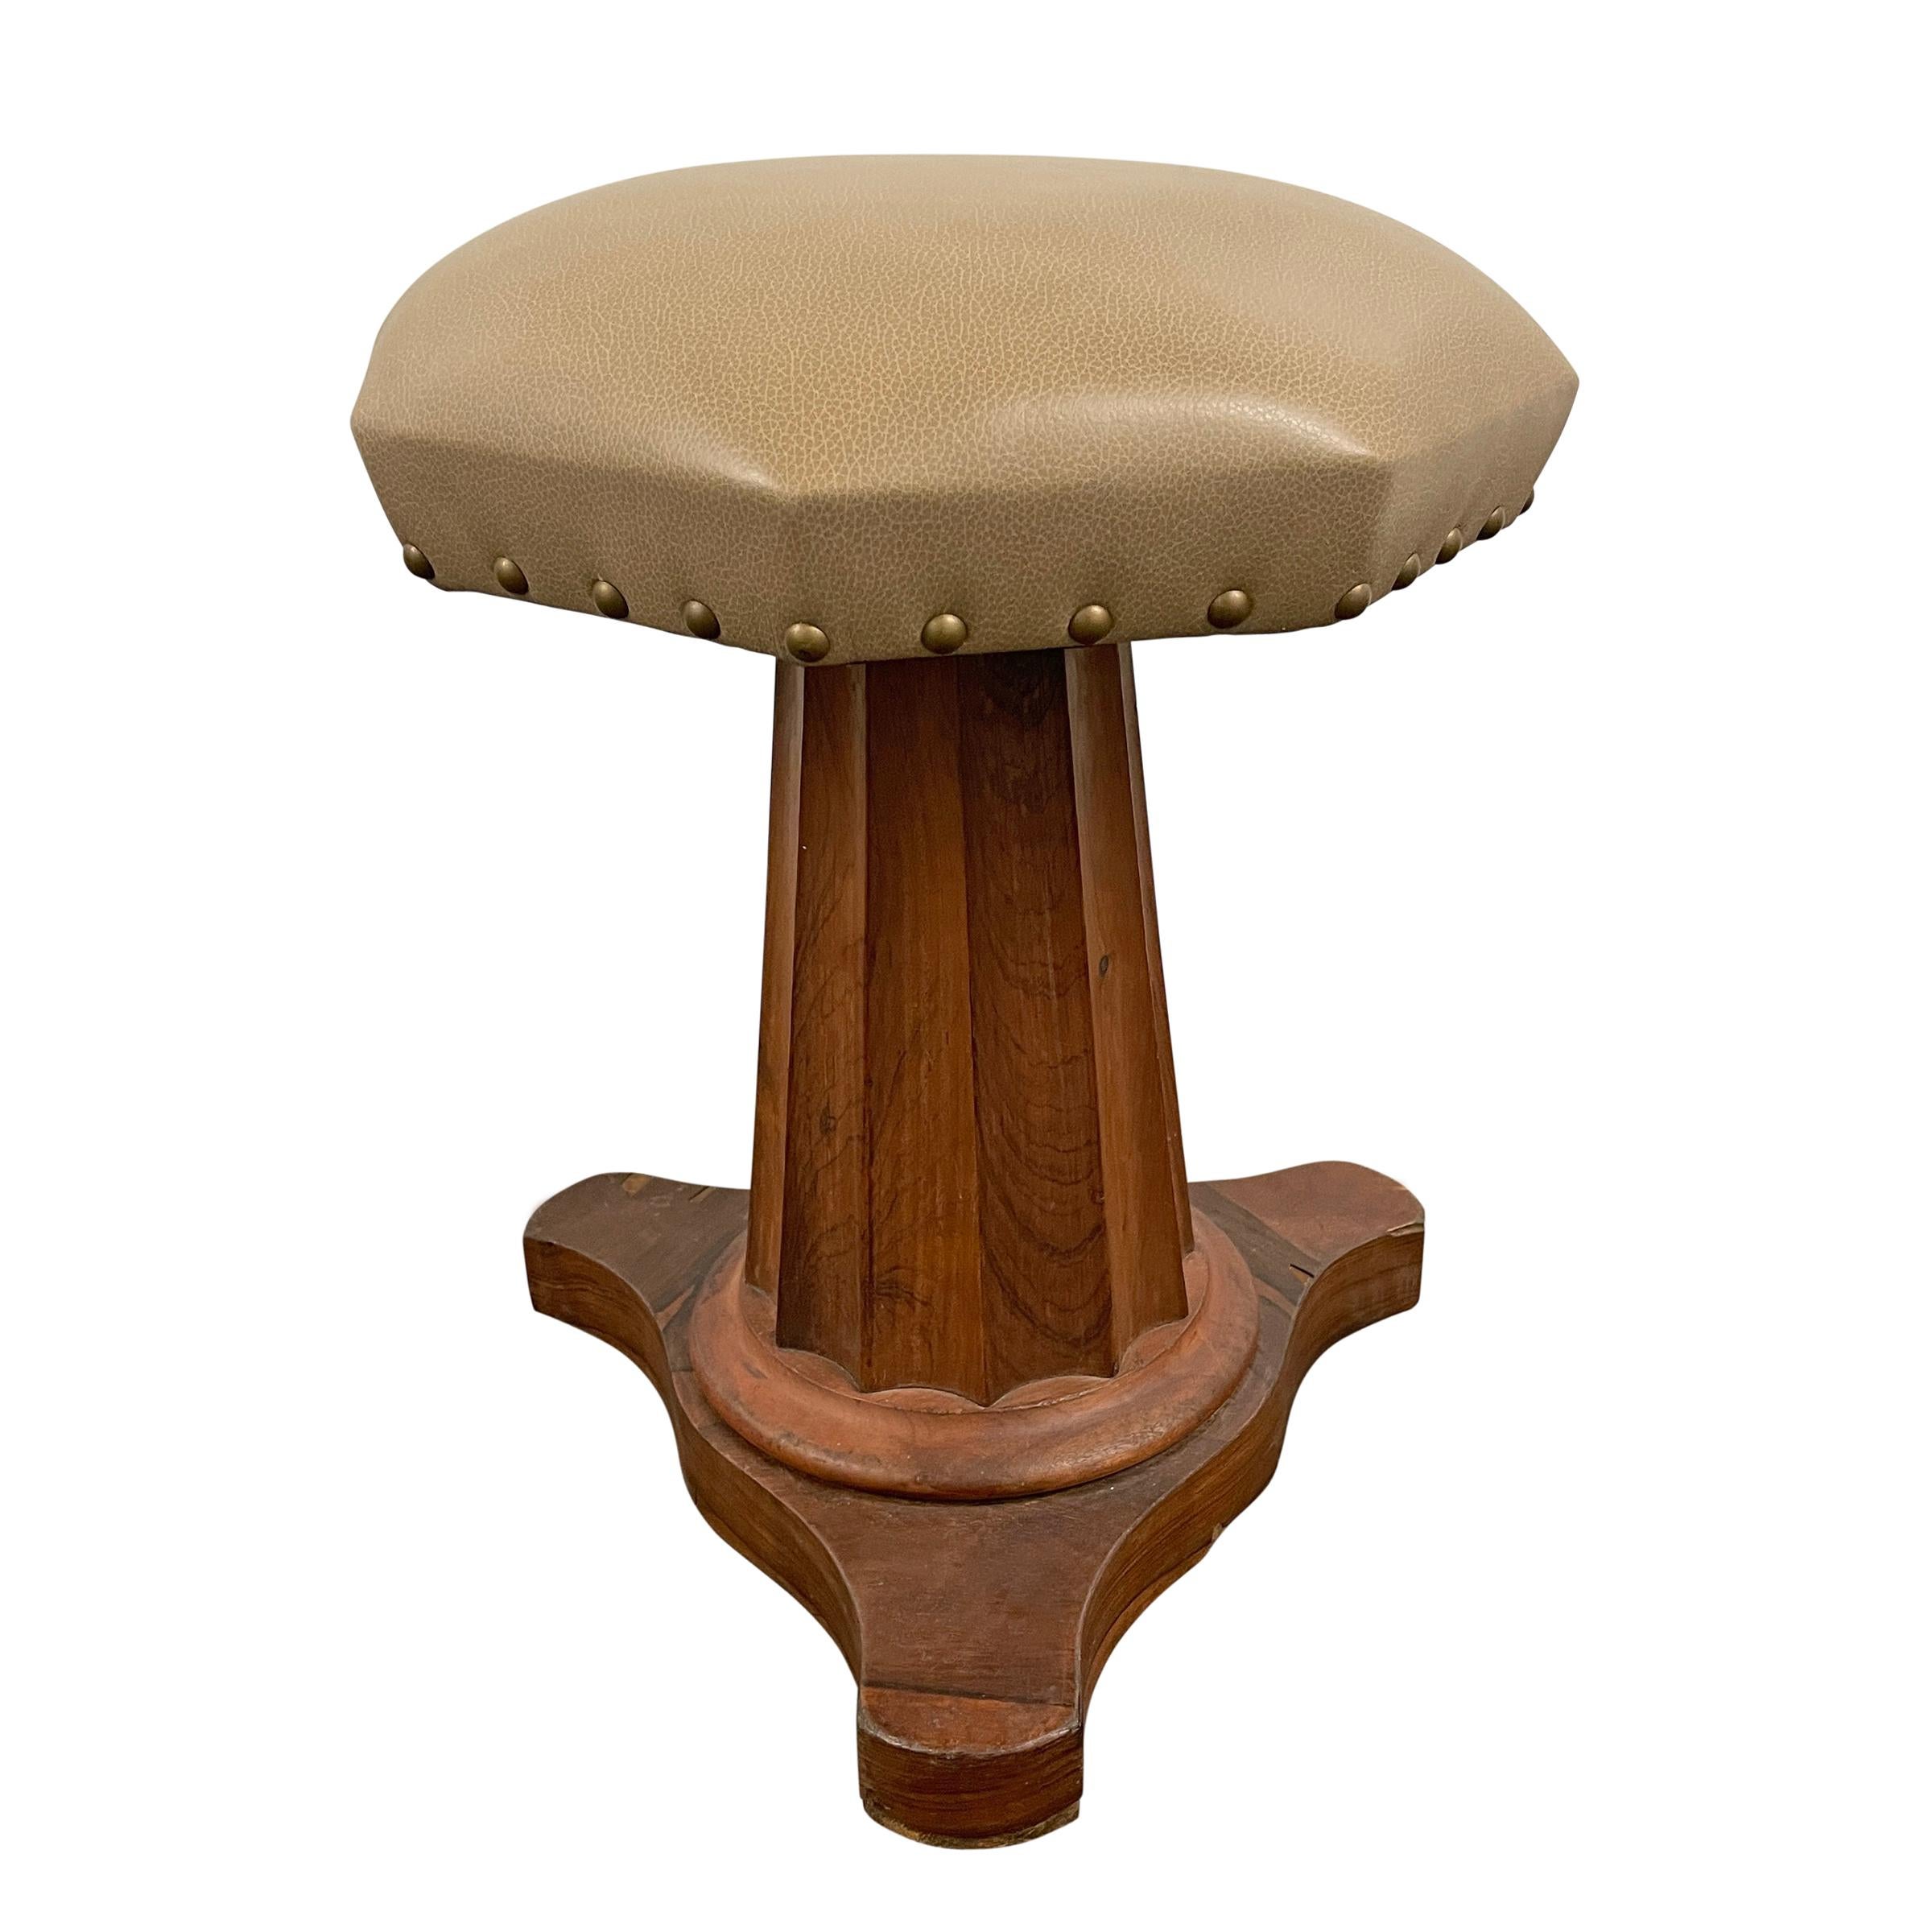 Mid-19th Century Early 20th Century American Empire Stool For Sale